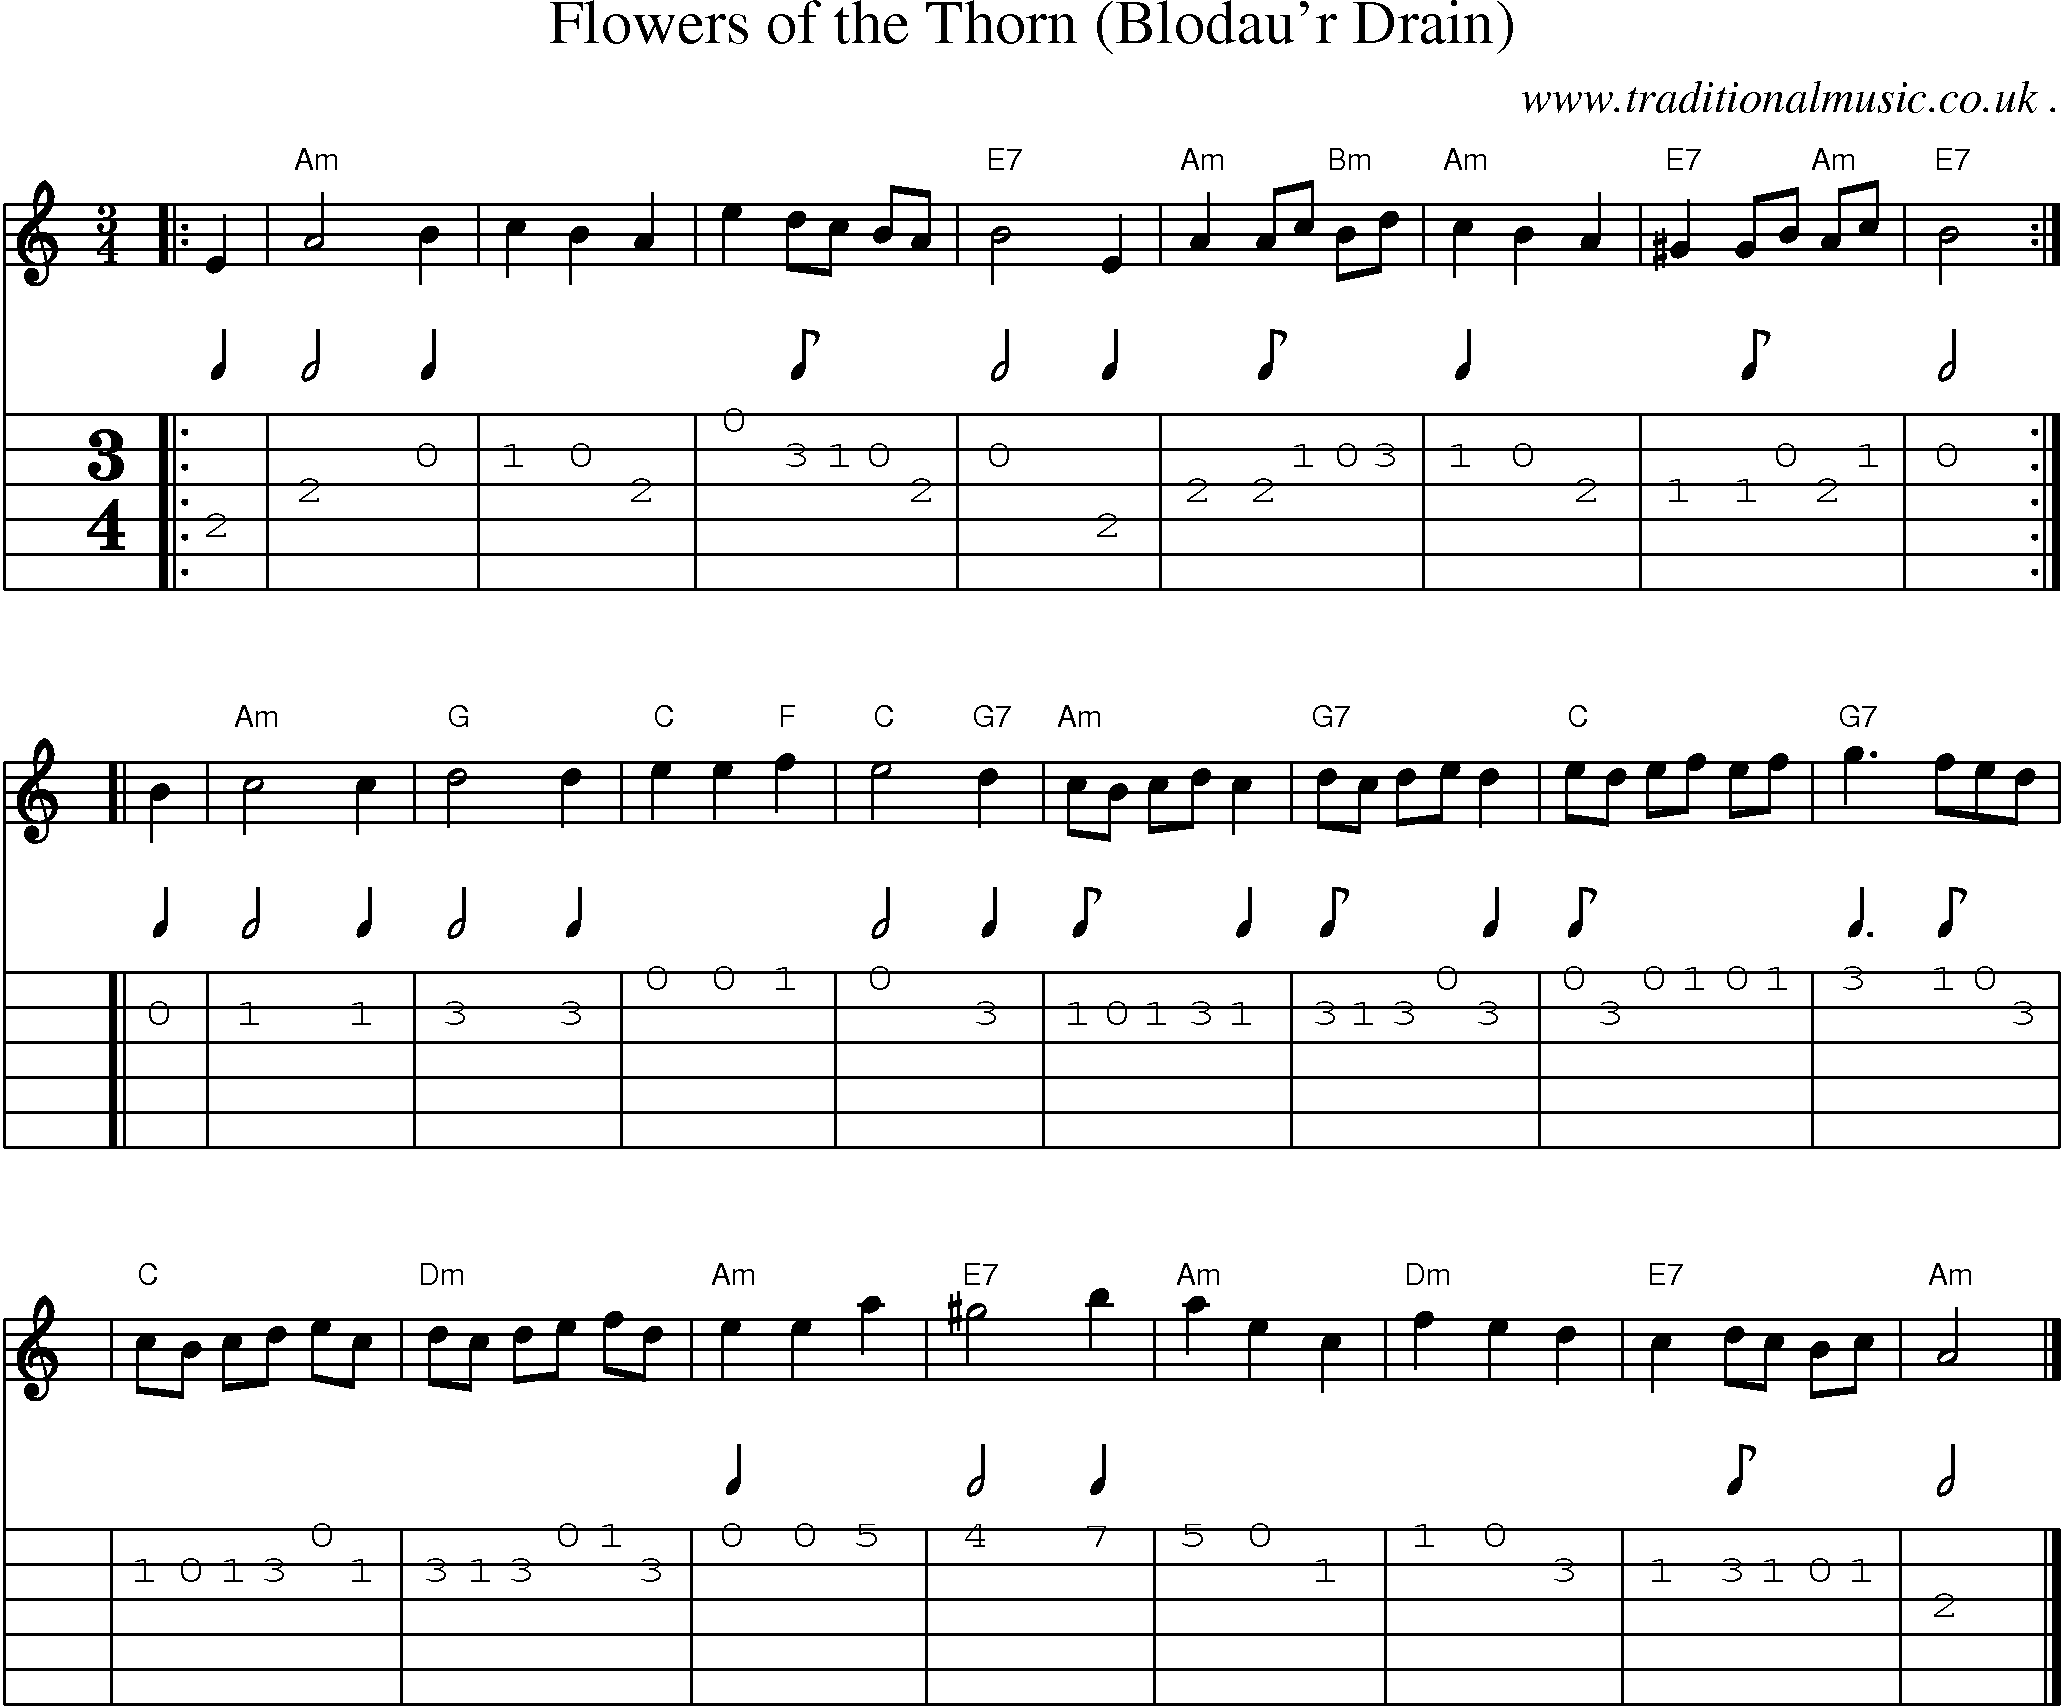 Sheet-music  score, Chords and Guitar Tabs for Flowers Of The Thorn Blodaur Drain